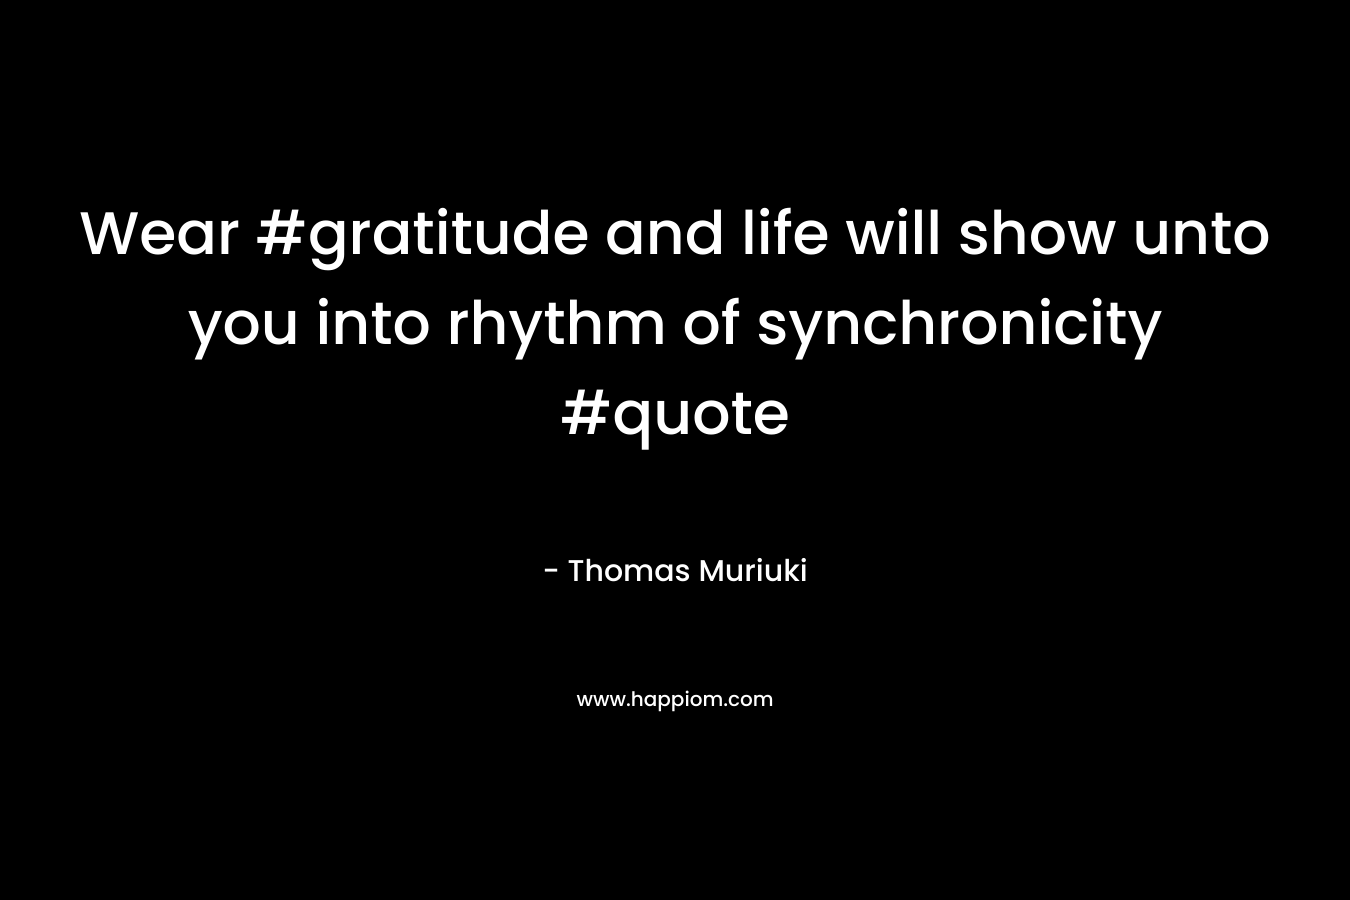 Wear #gratitude and life will show unto you into rhythm of synchronicity #quote